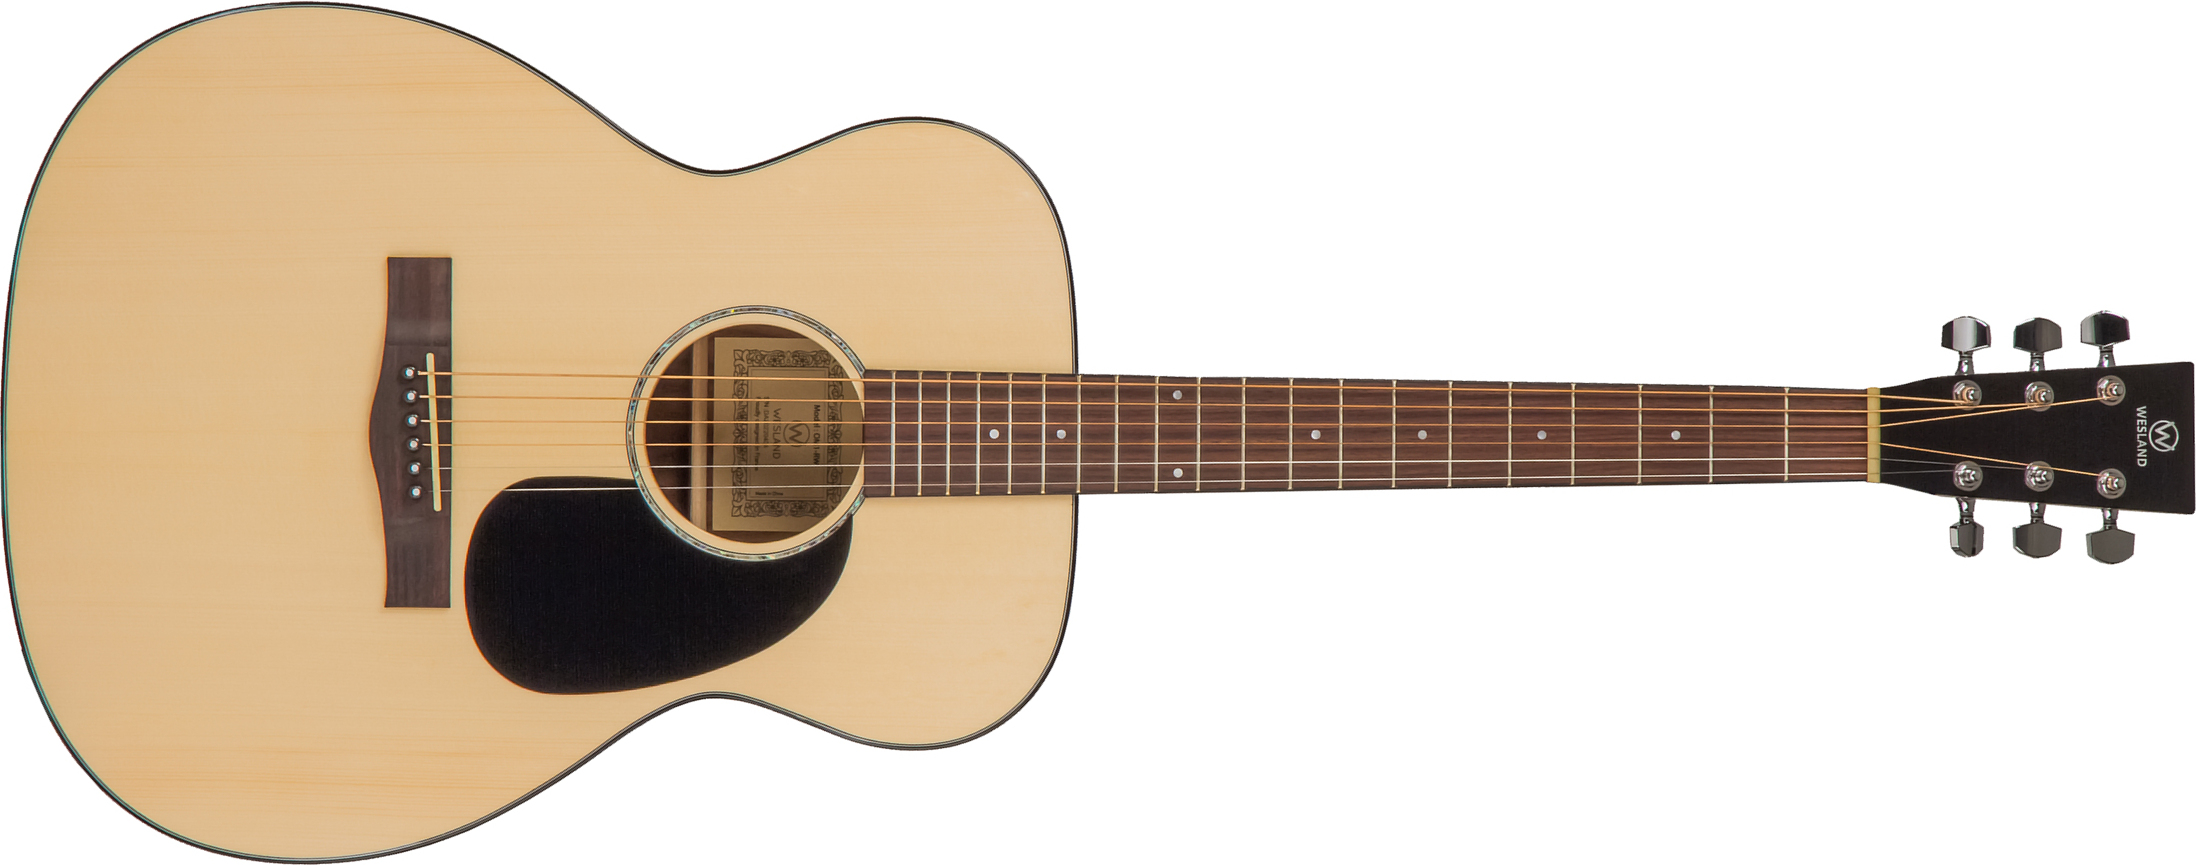 Wesland Om1-rw Orchestra Model Epicea Palissandre Rw - Natural - Acoustic guitar & electro - Main picture